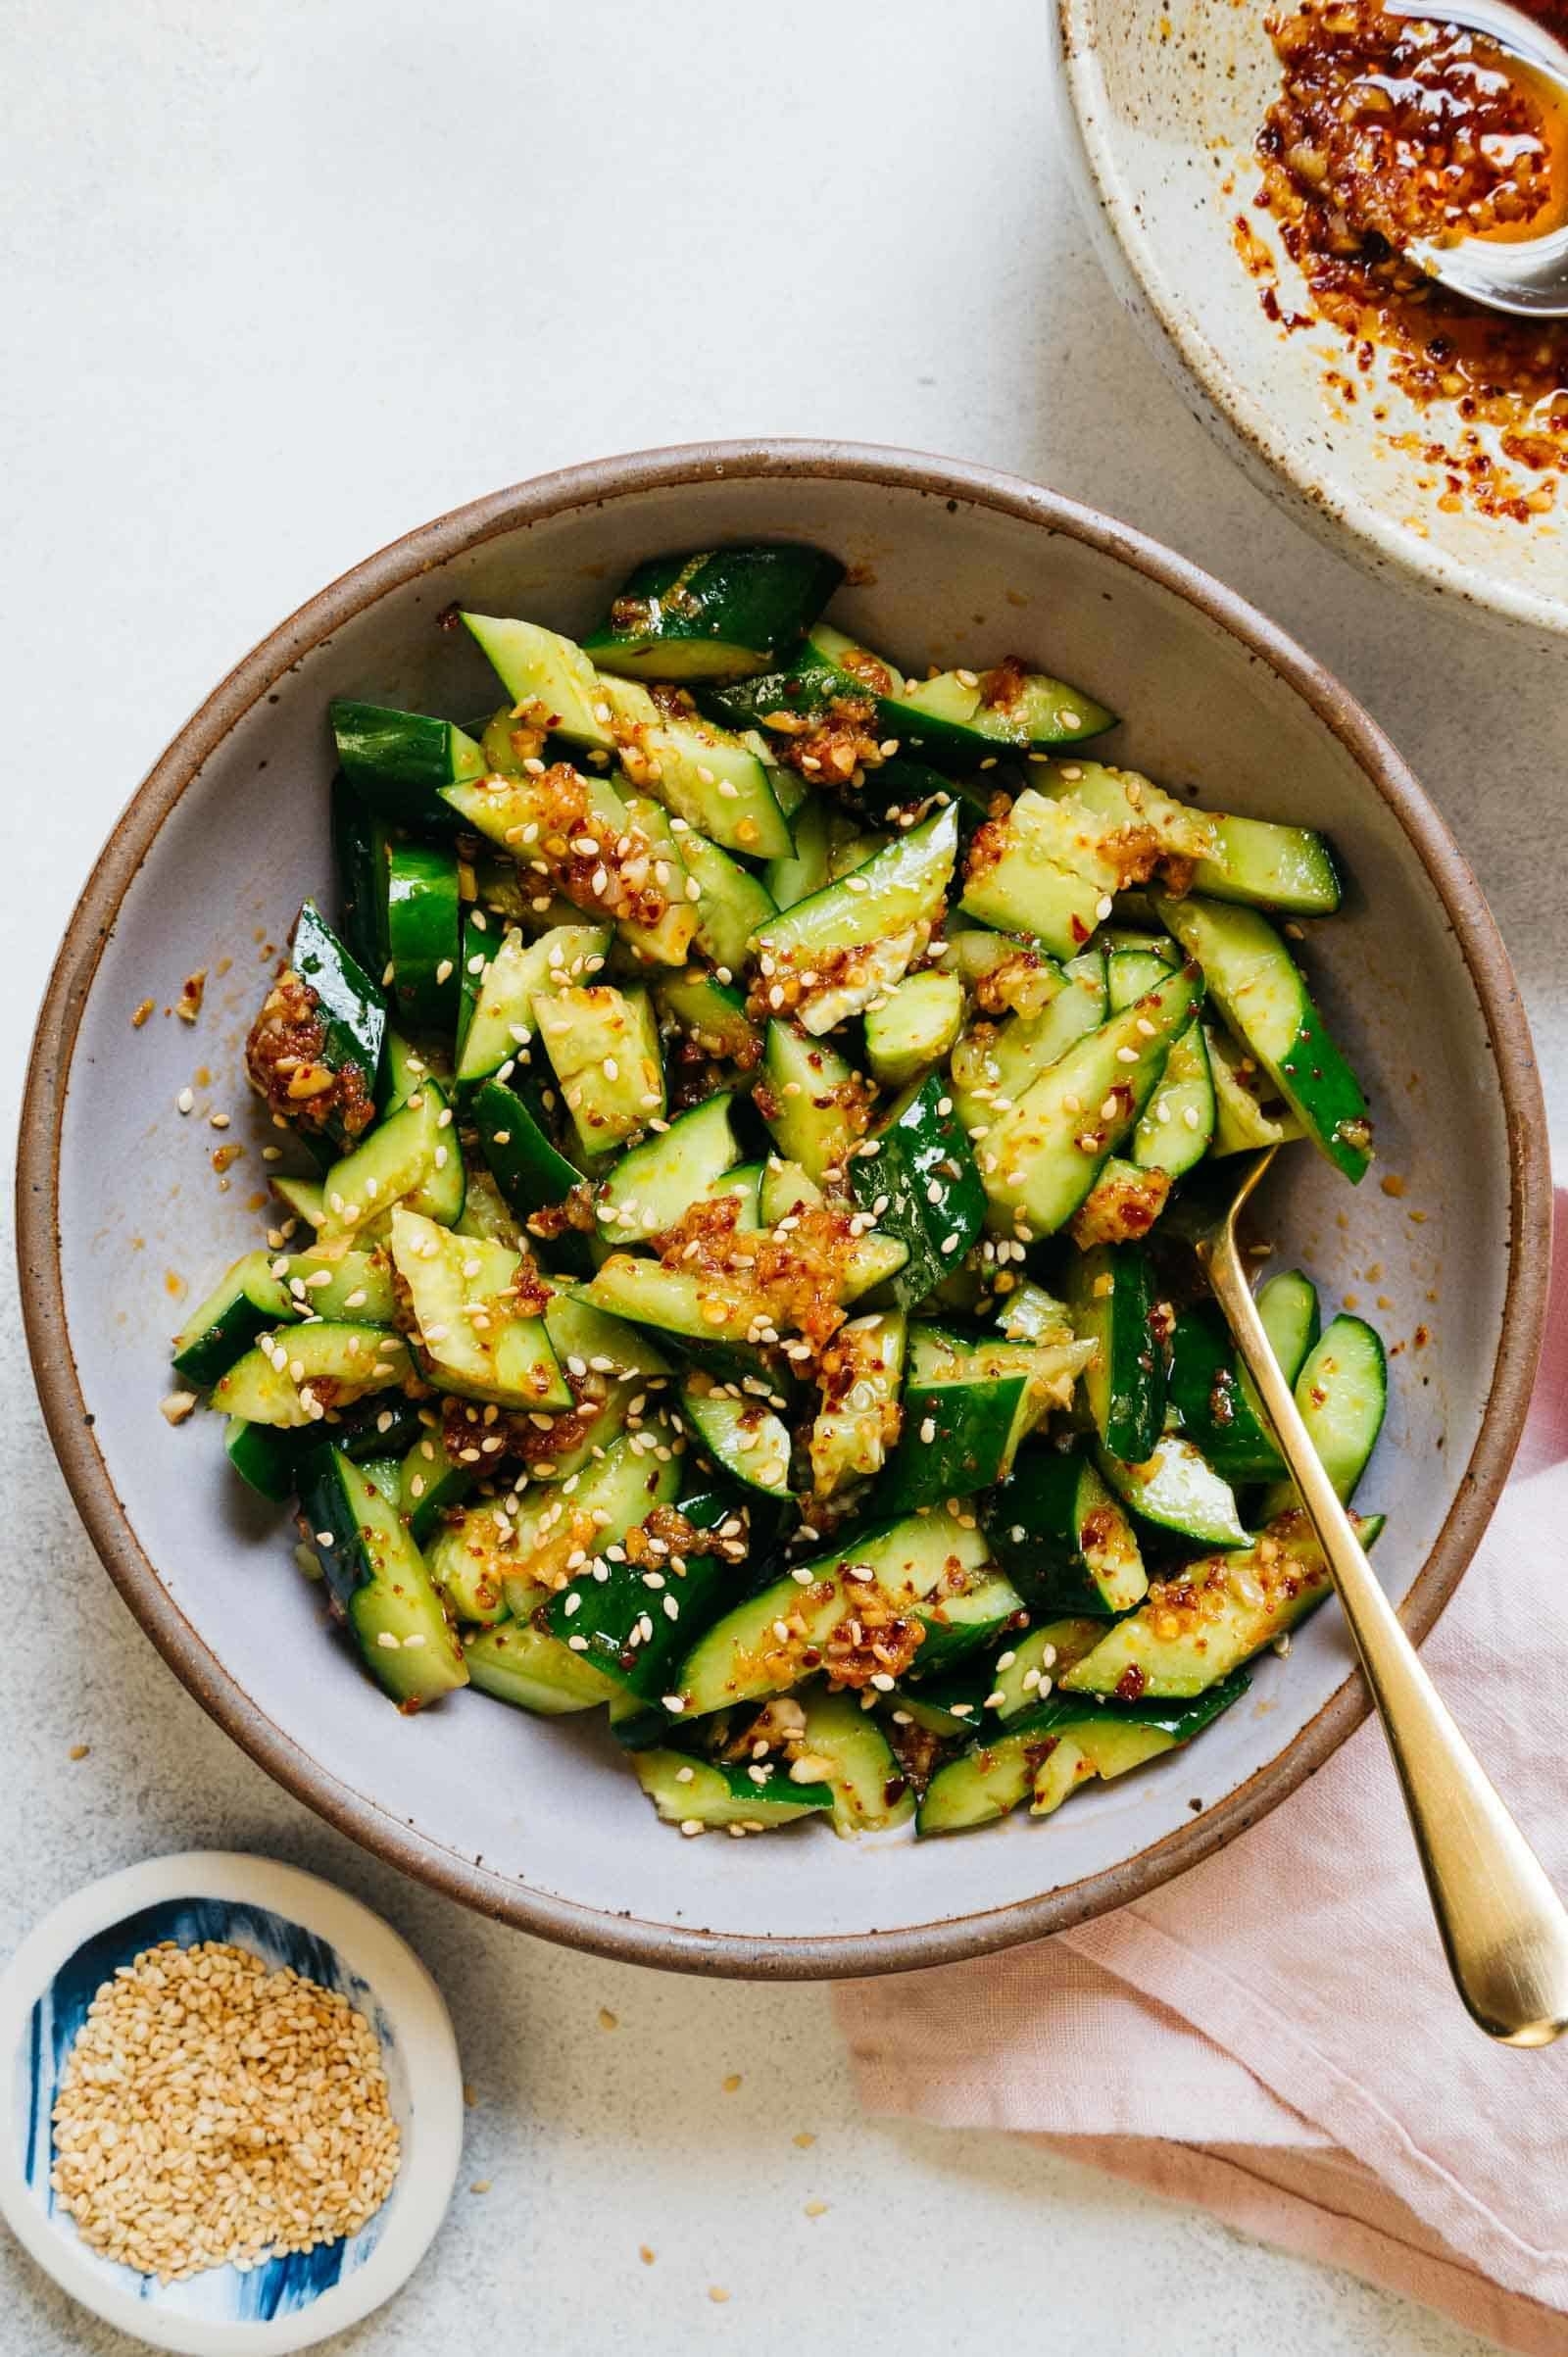 Smashed cucumbers dressed with crunchy chili oil.